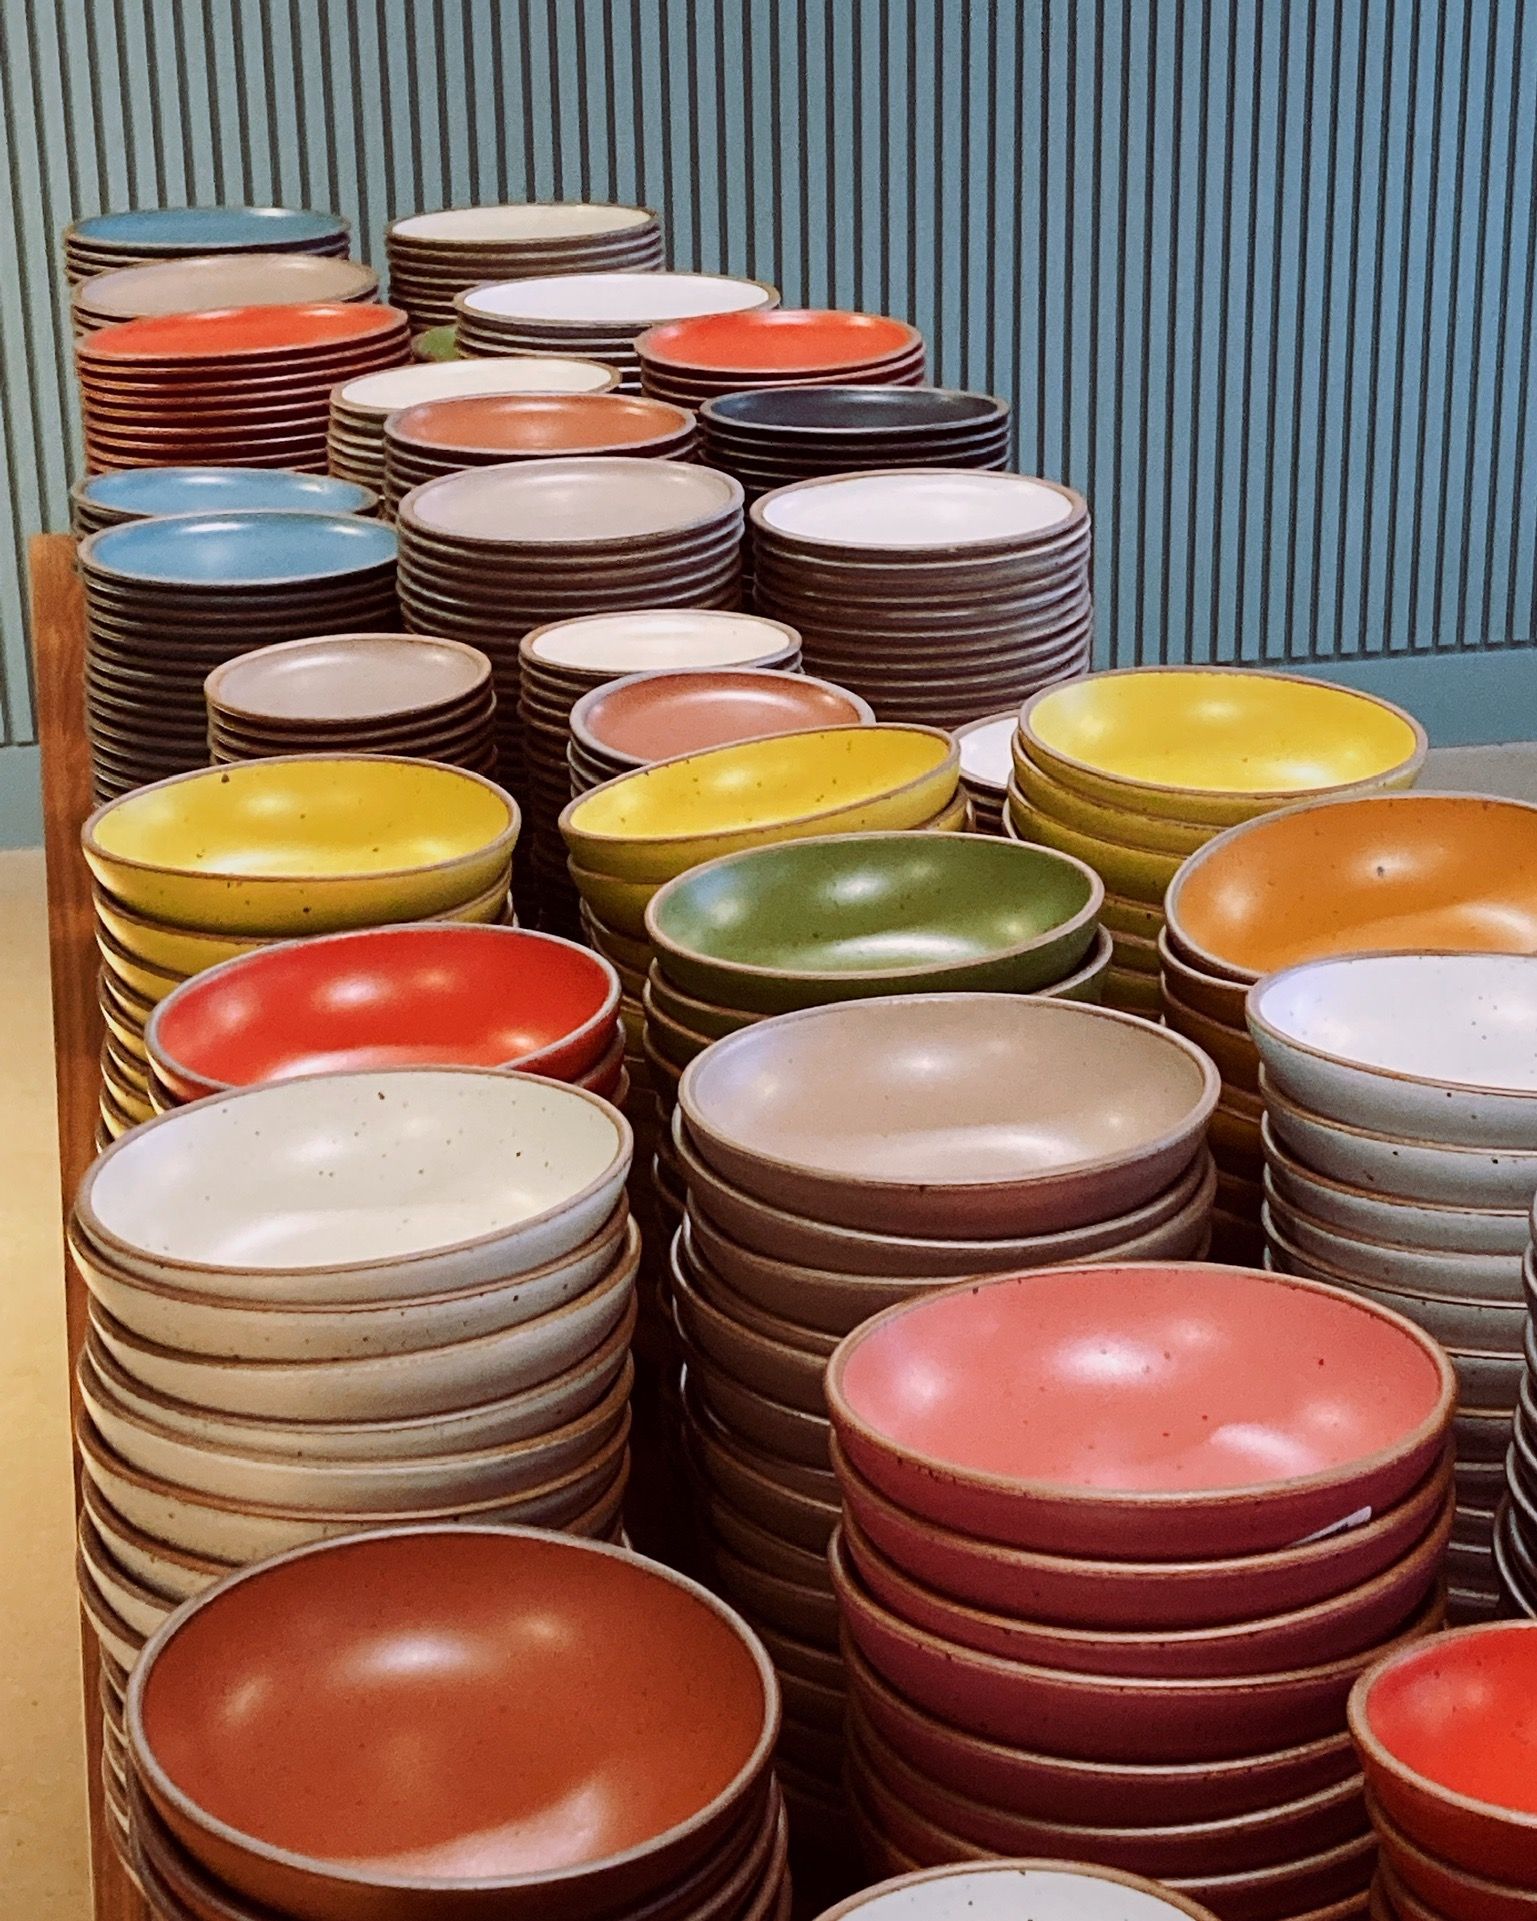 On a table, there are large stacks of ceramic bowls in all different colors of the rainbow